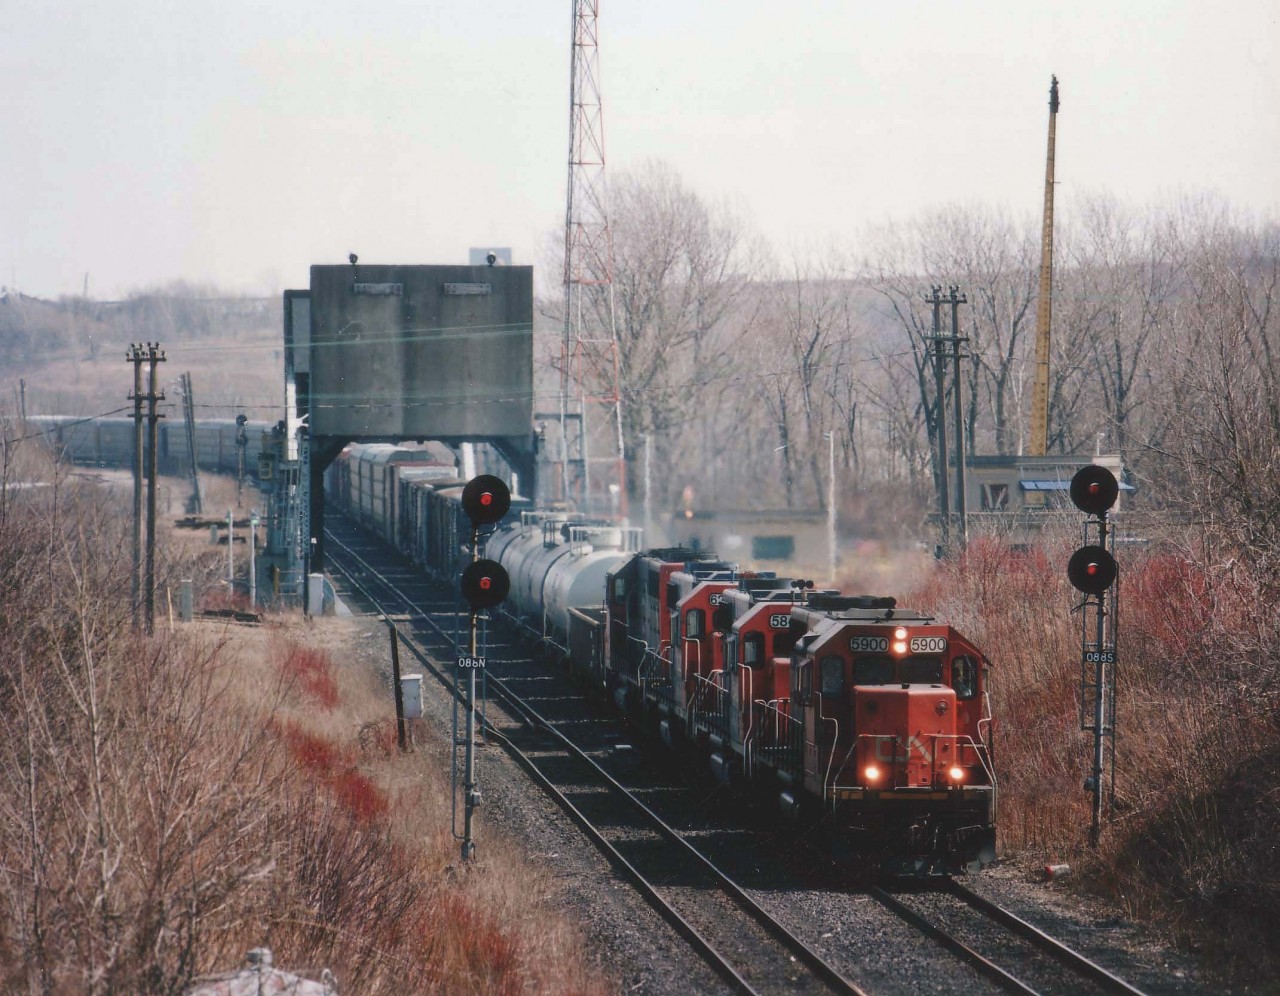 This image, although a bad sun angle, is noteable in the fact that this CN #332 is represented by no locomotives that are pure CN. Up front on this Toronto-bound train are GTW 5900, GT 5849, GT 6222 and GTW 5920, seen here crossing over the Welland Canal near Merritton in a late morning photo.
In 1997 the number 332 was assigned for a Buffalo-Toronto daily freight; its counterpart was #333.